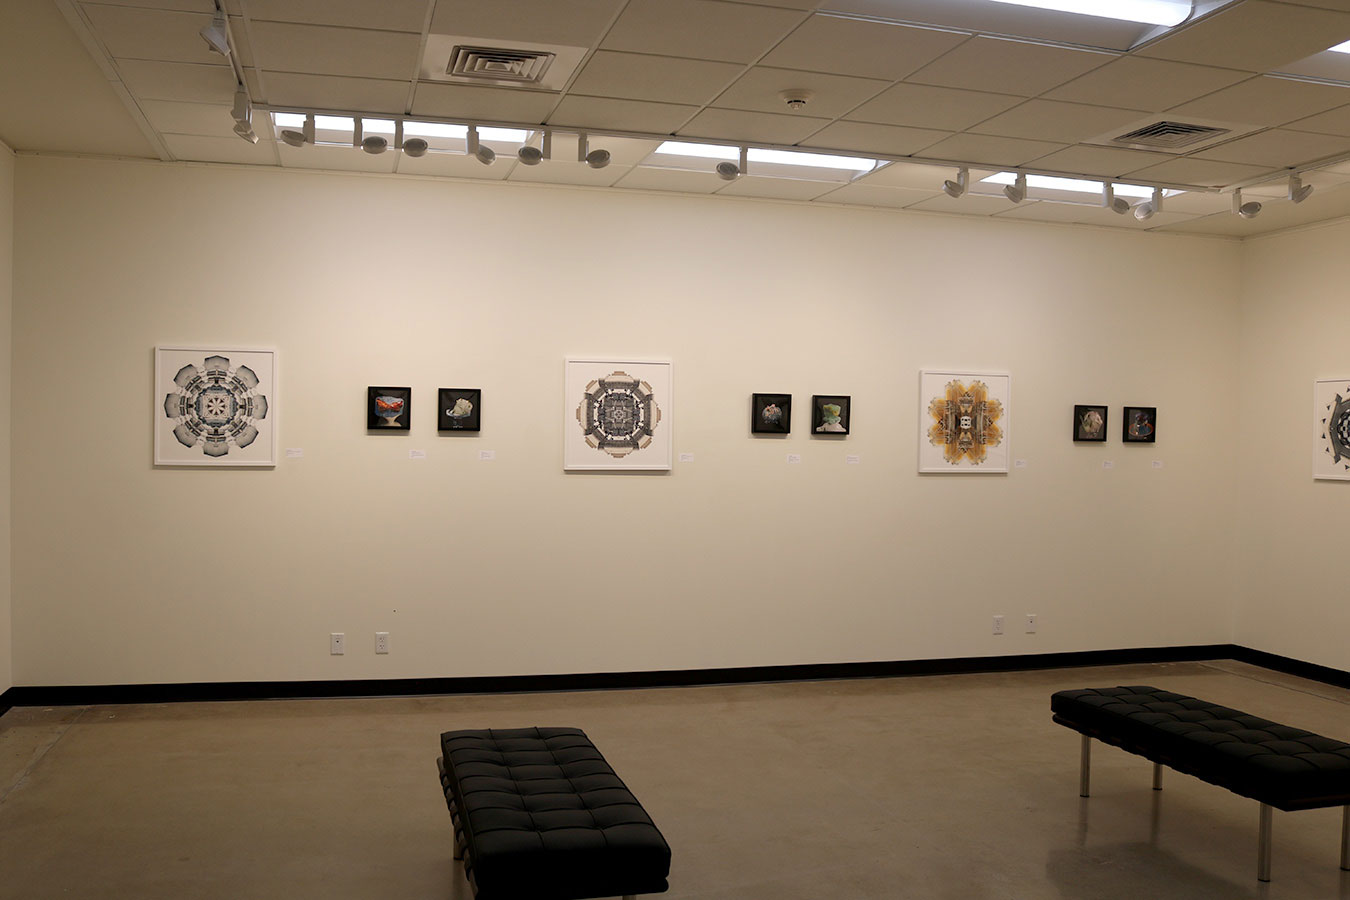 An exhibition featuring work by Russ Nordman and Jody Boyer